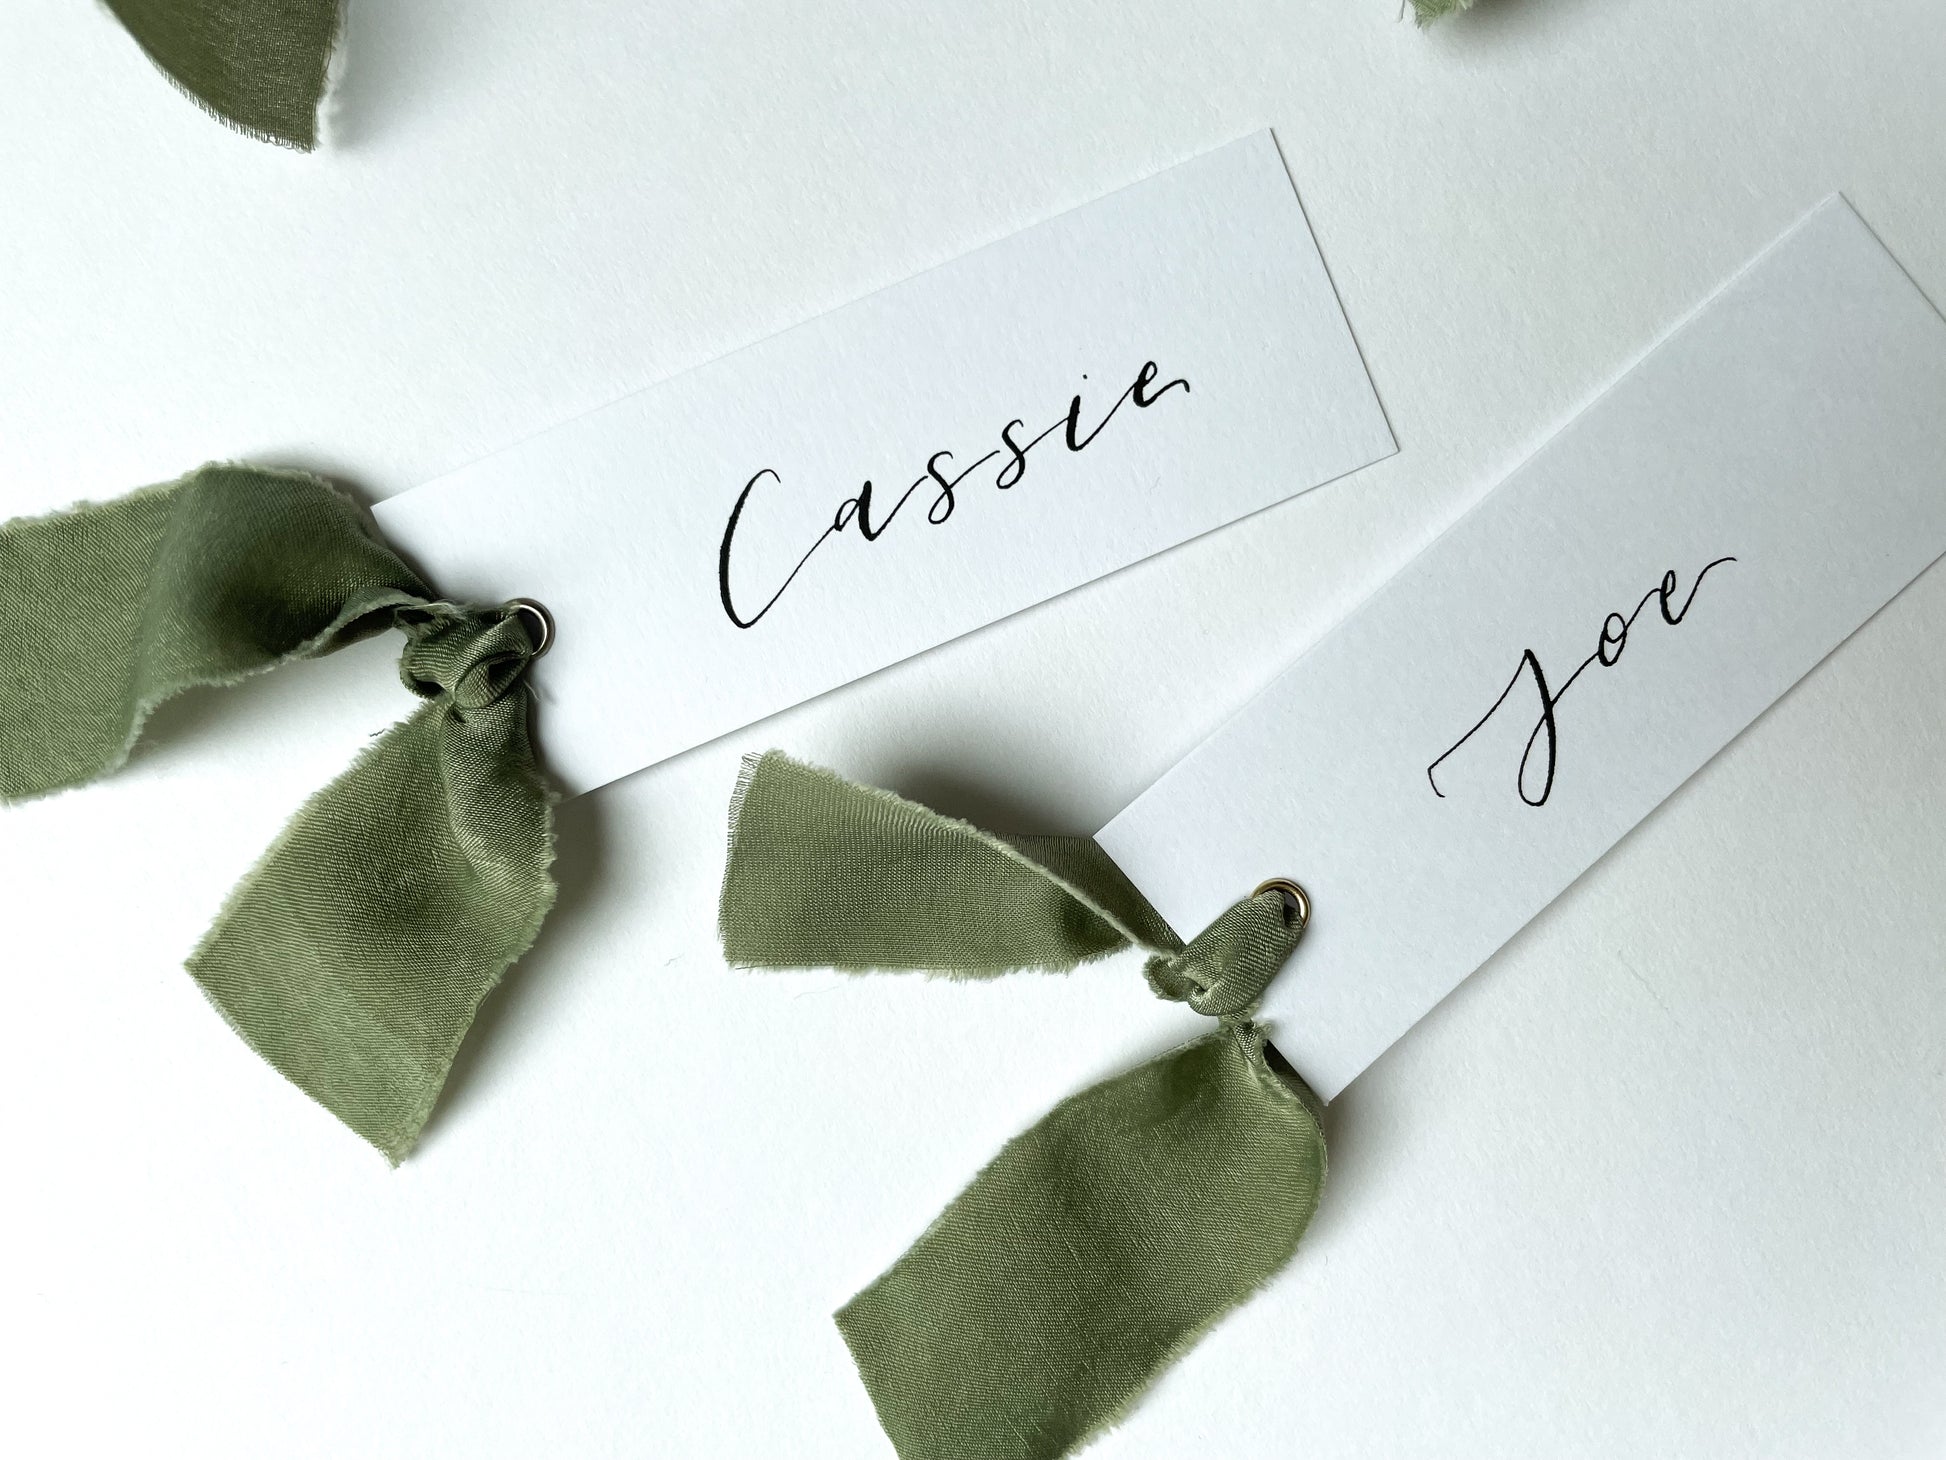 Wedding place cards, Table name cards, Wedding name cards, calligraphy place cards, ribbon place cards